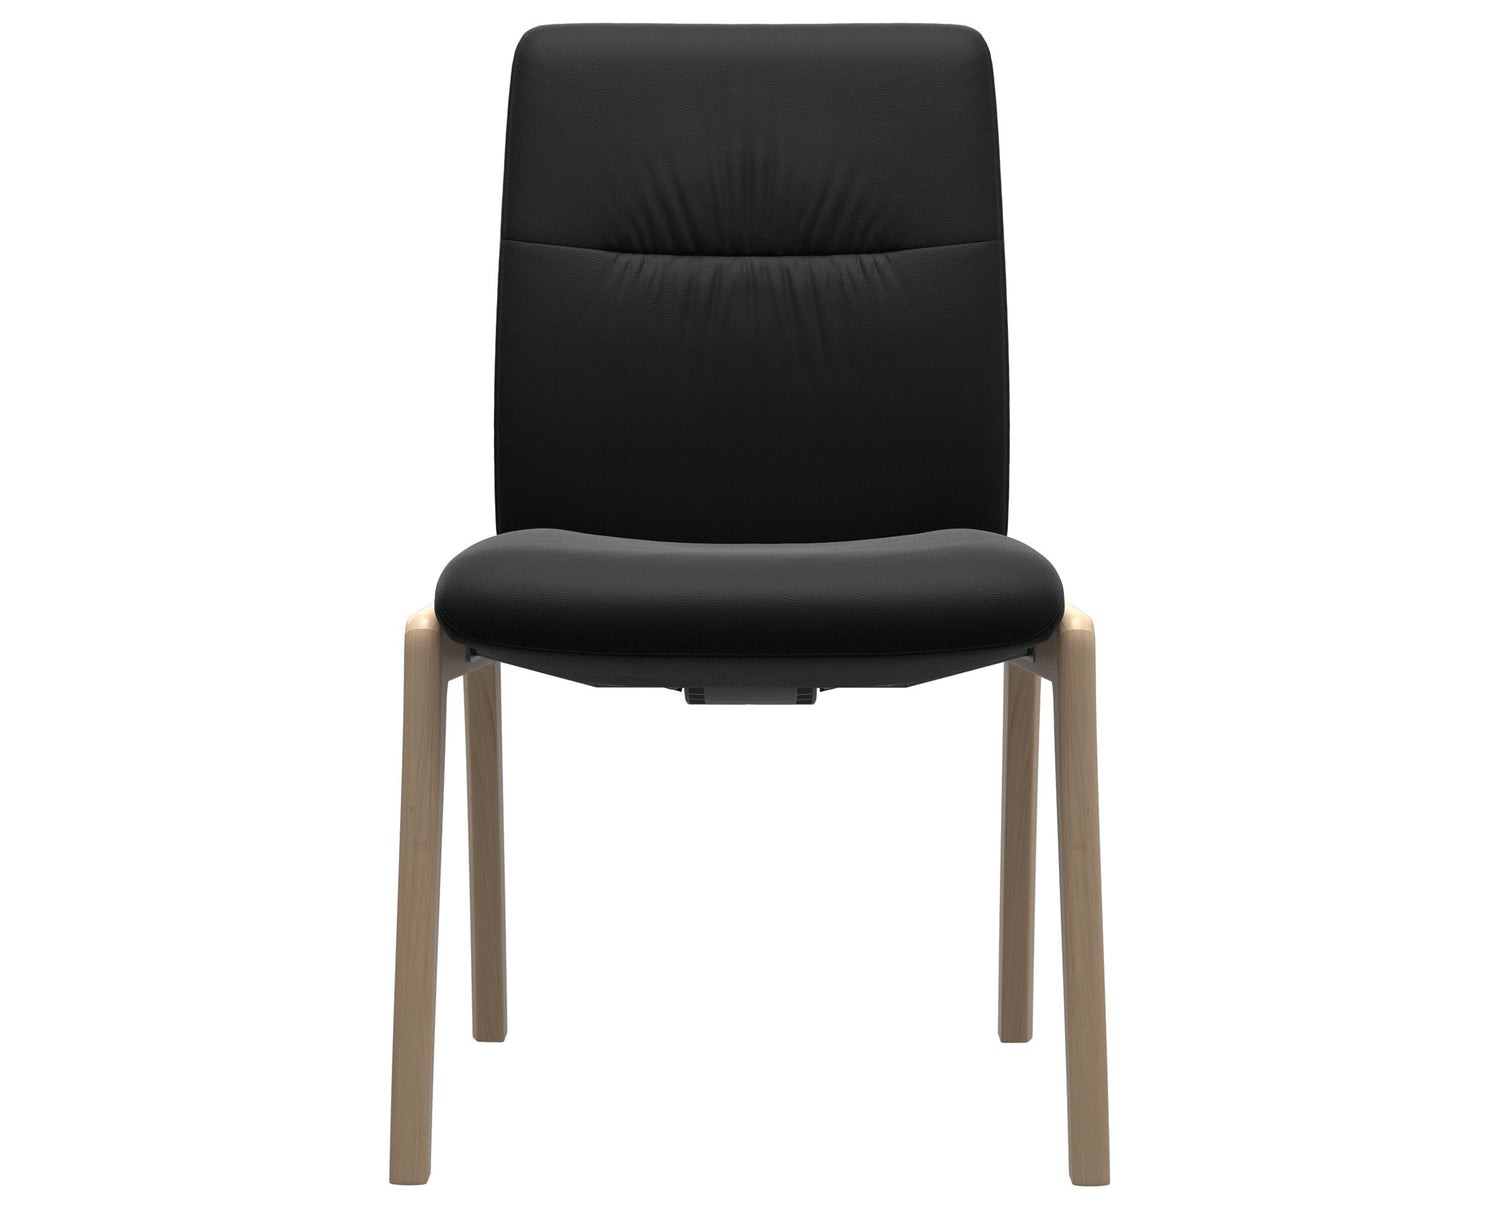 Paloma Leather Black & Natural Base | Stressless Mint Low Back D100 Dining Chair | Valley Ridge Furniture